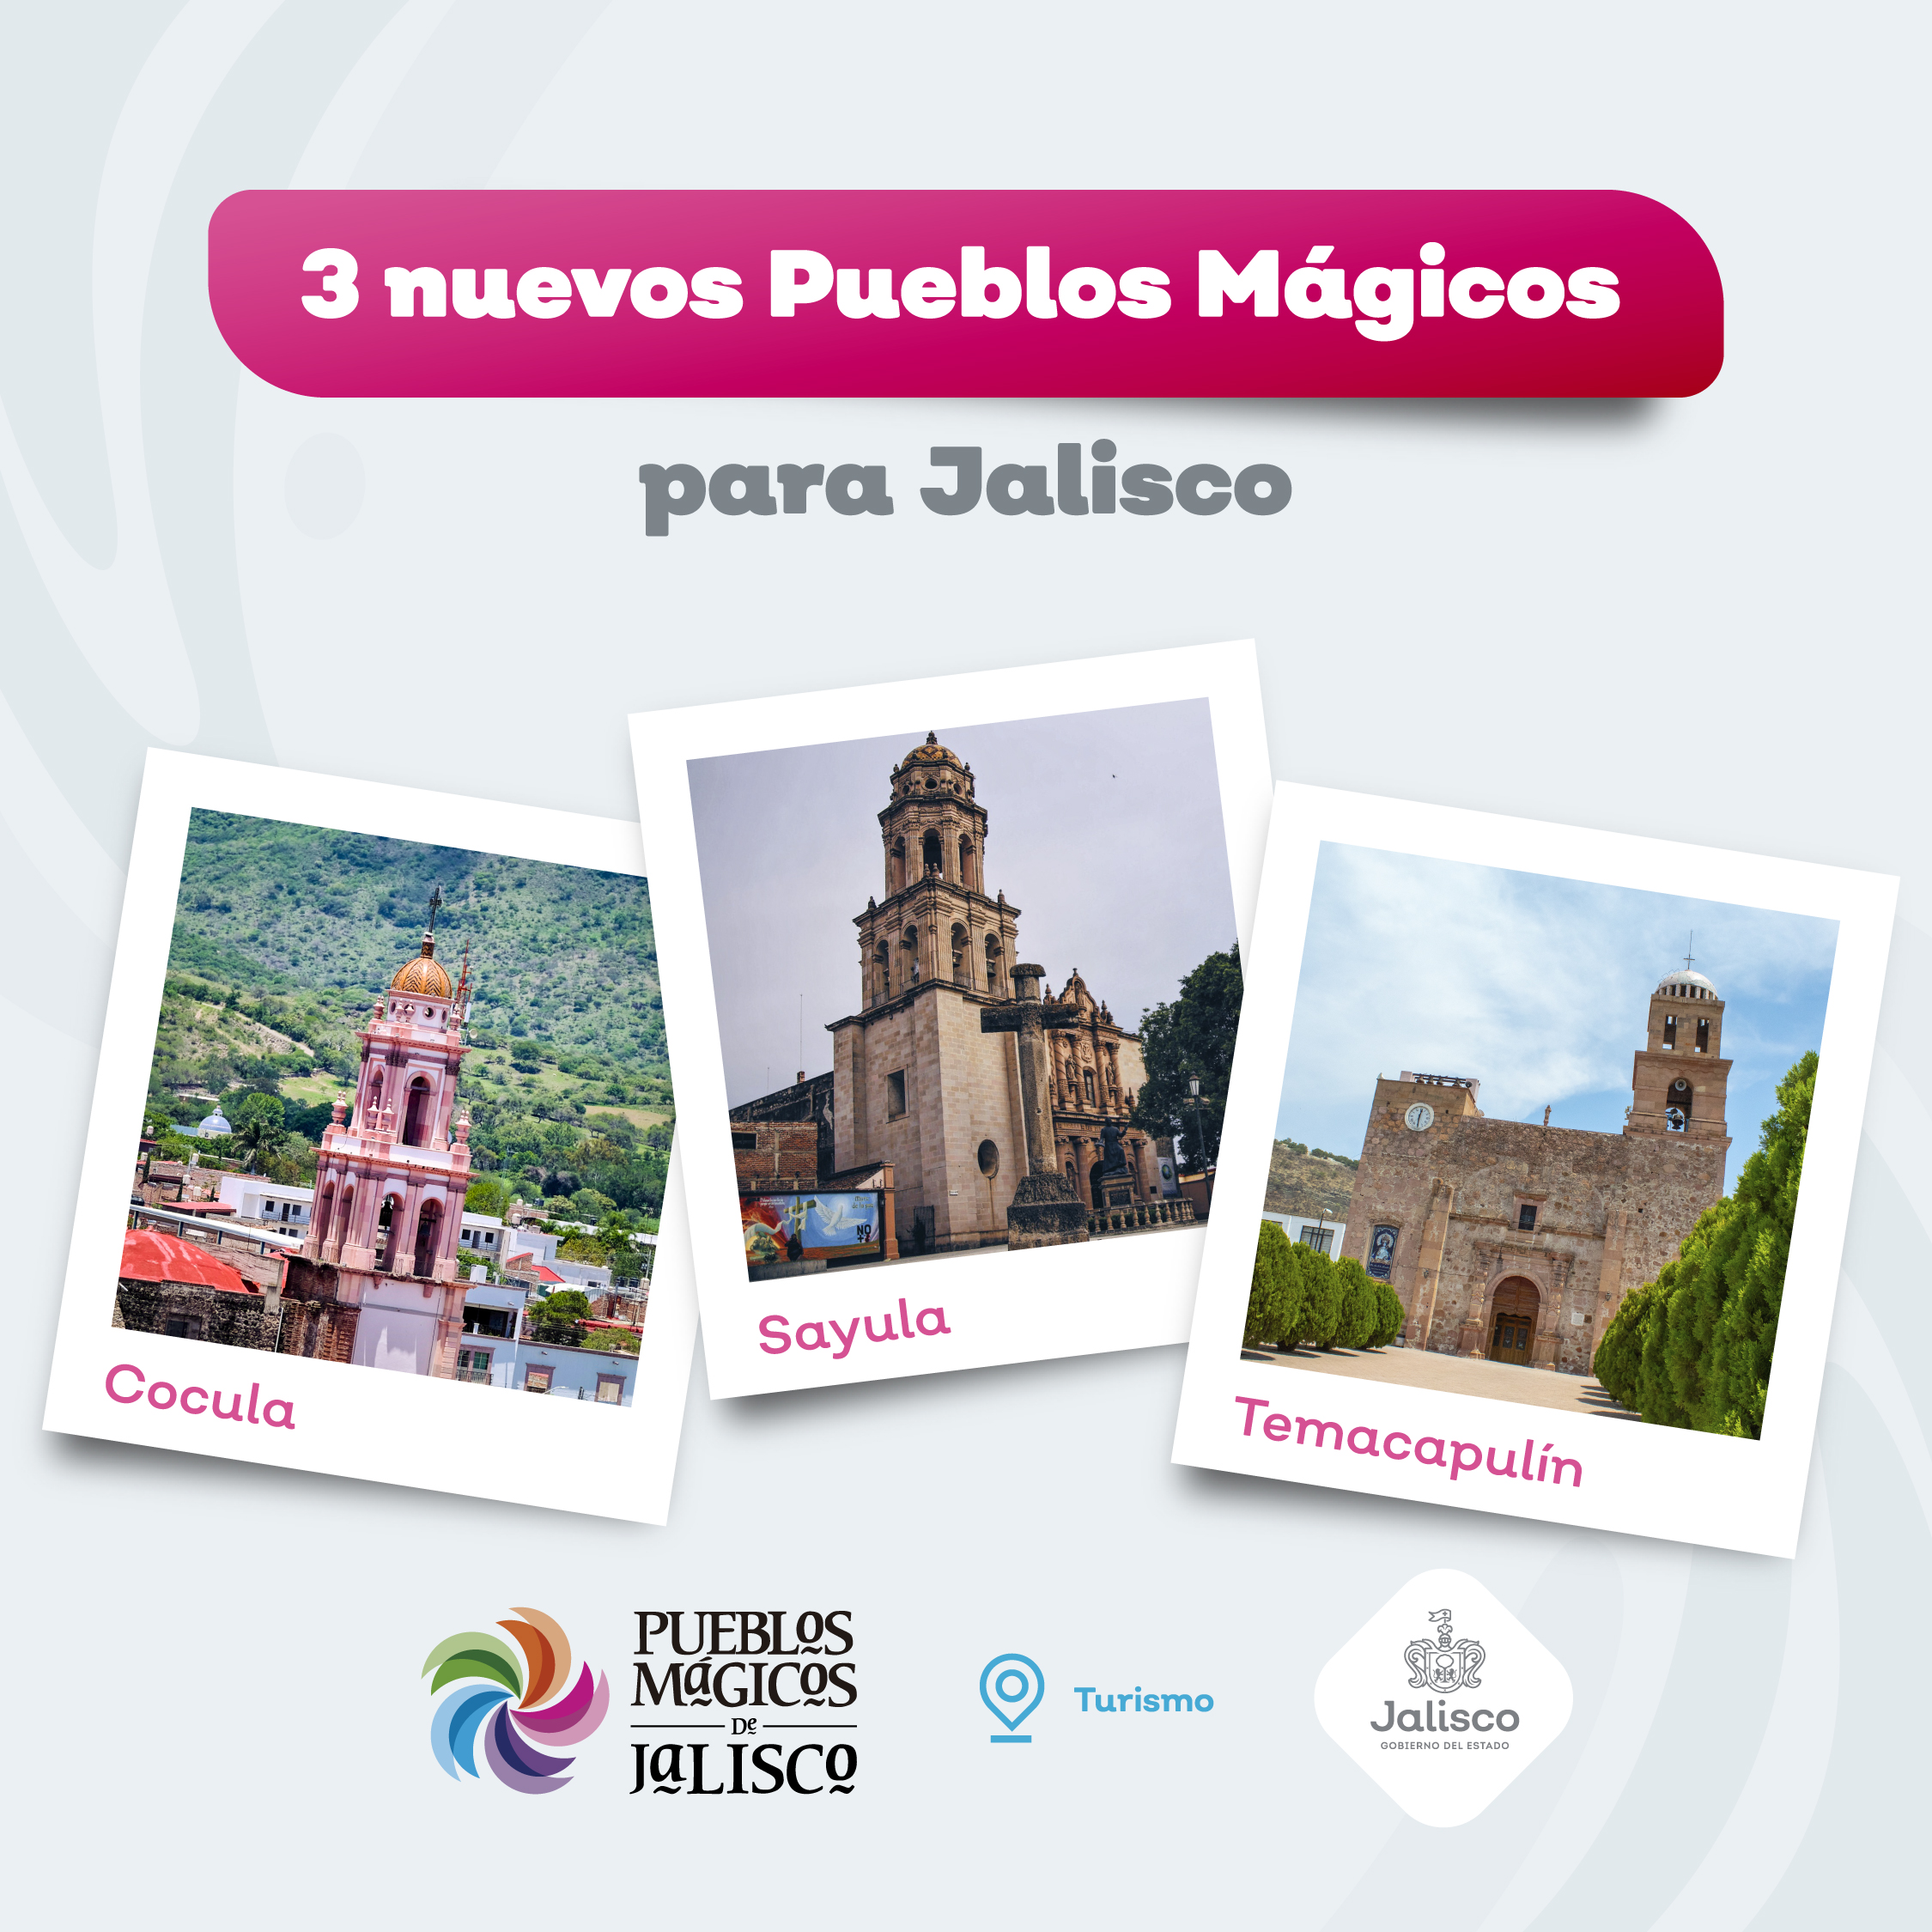 Jalisco has three new Magical Towns: Cocula, Sayula and Temacapulín